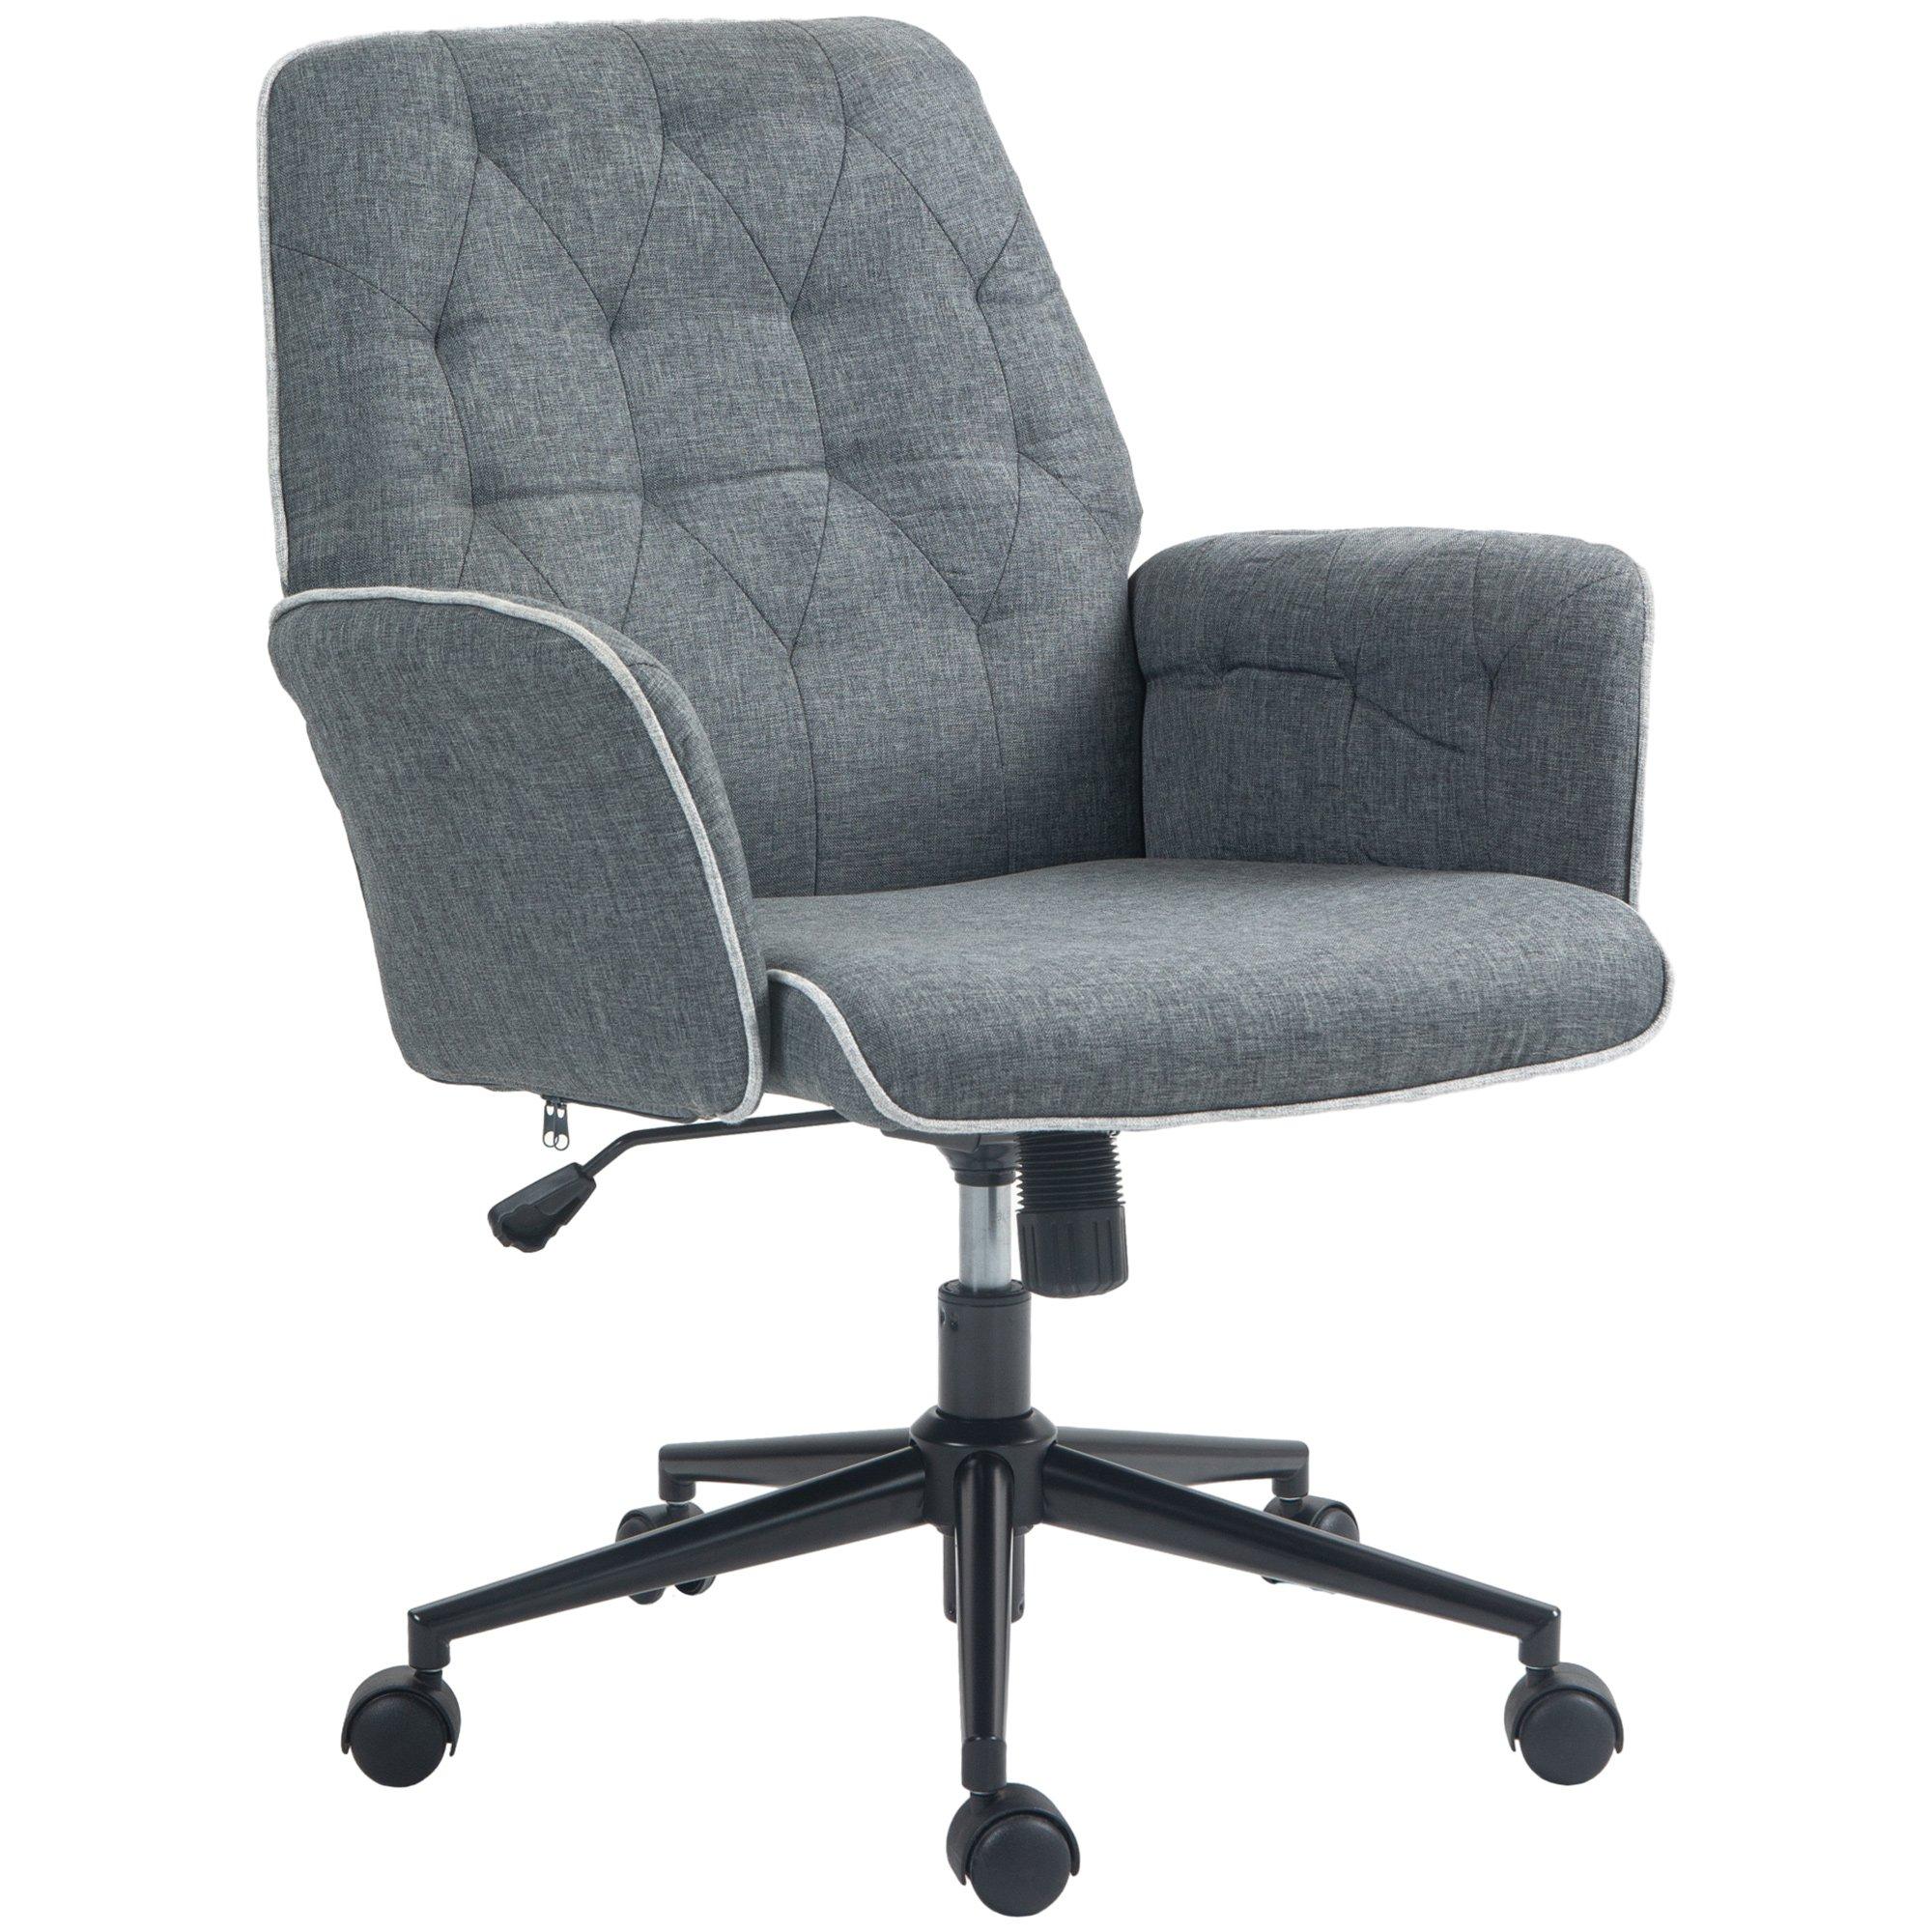 Computer Chair with Armrest Modern Style Tufted For Home Office